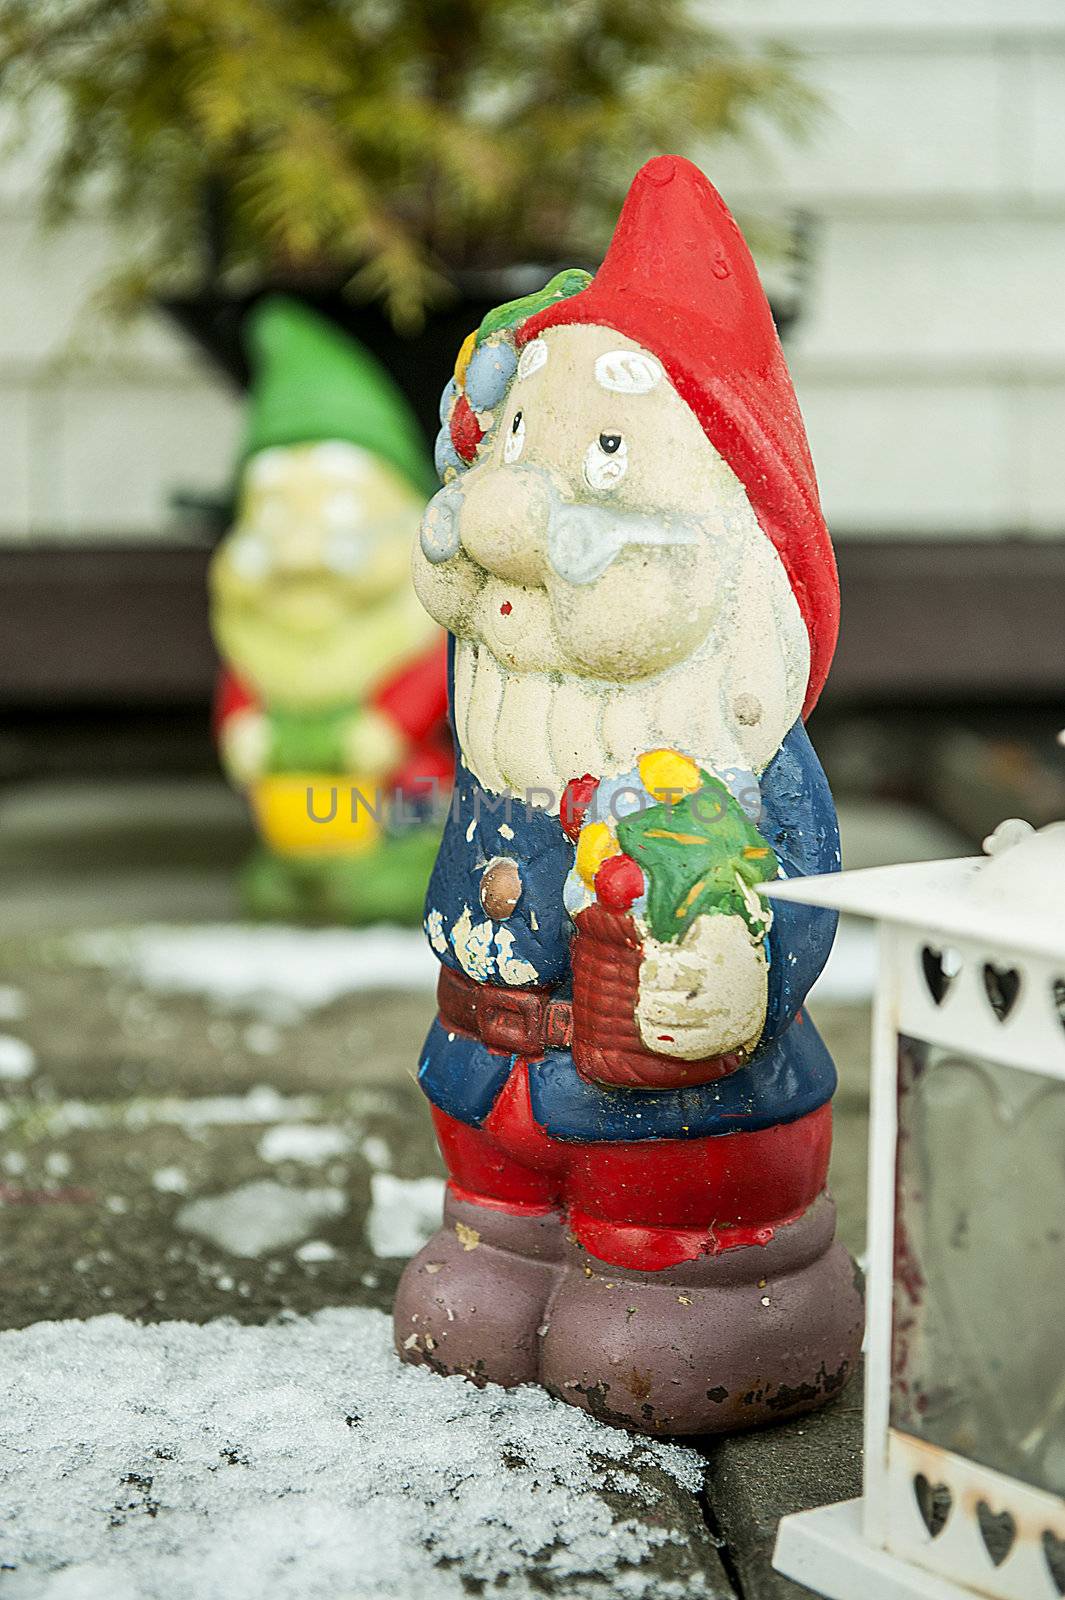 Decorated gnomes on the eve of Christmas